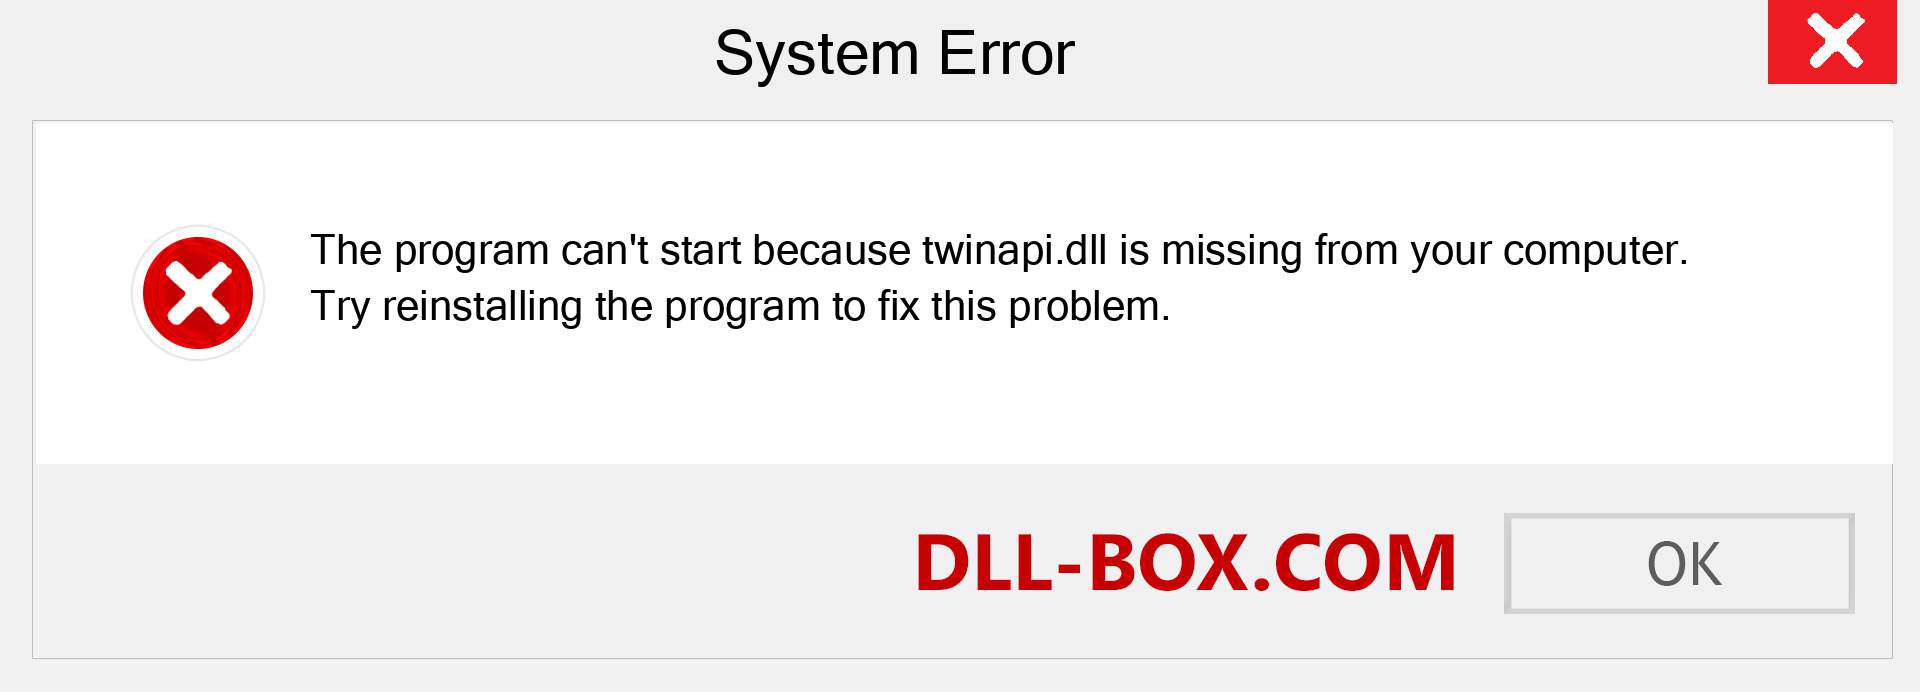  twinapi.dll file is missing?. Download for Windows 7, 8, 10 - Fix  twinapi dll Missing Error on Windows, photos, images